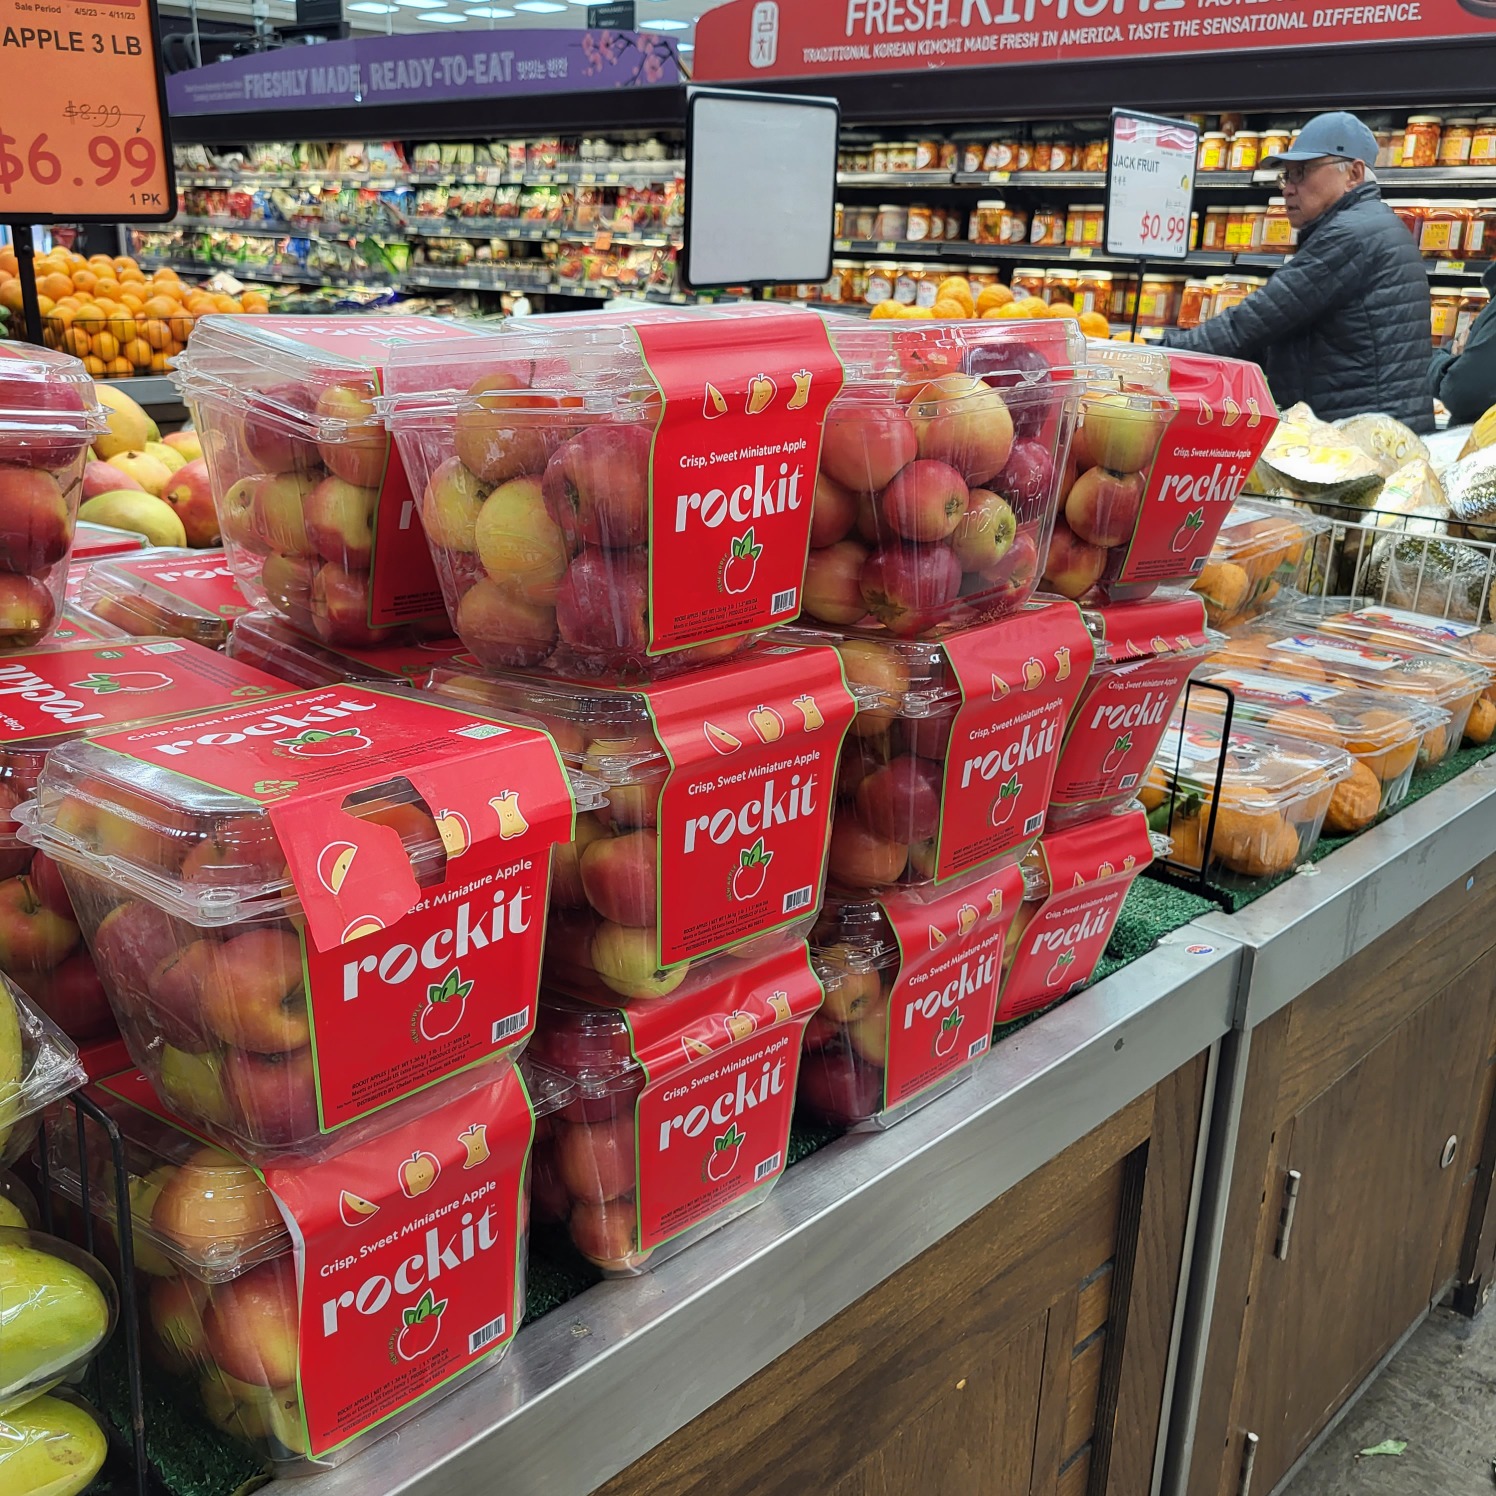 Rockit sets pace in global snack market - Fruit Growers News